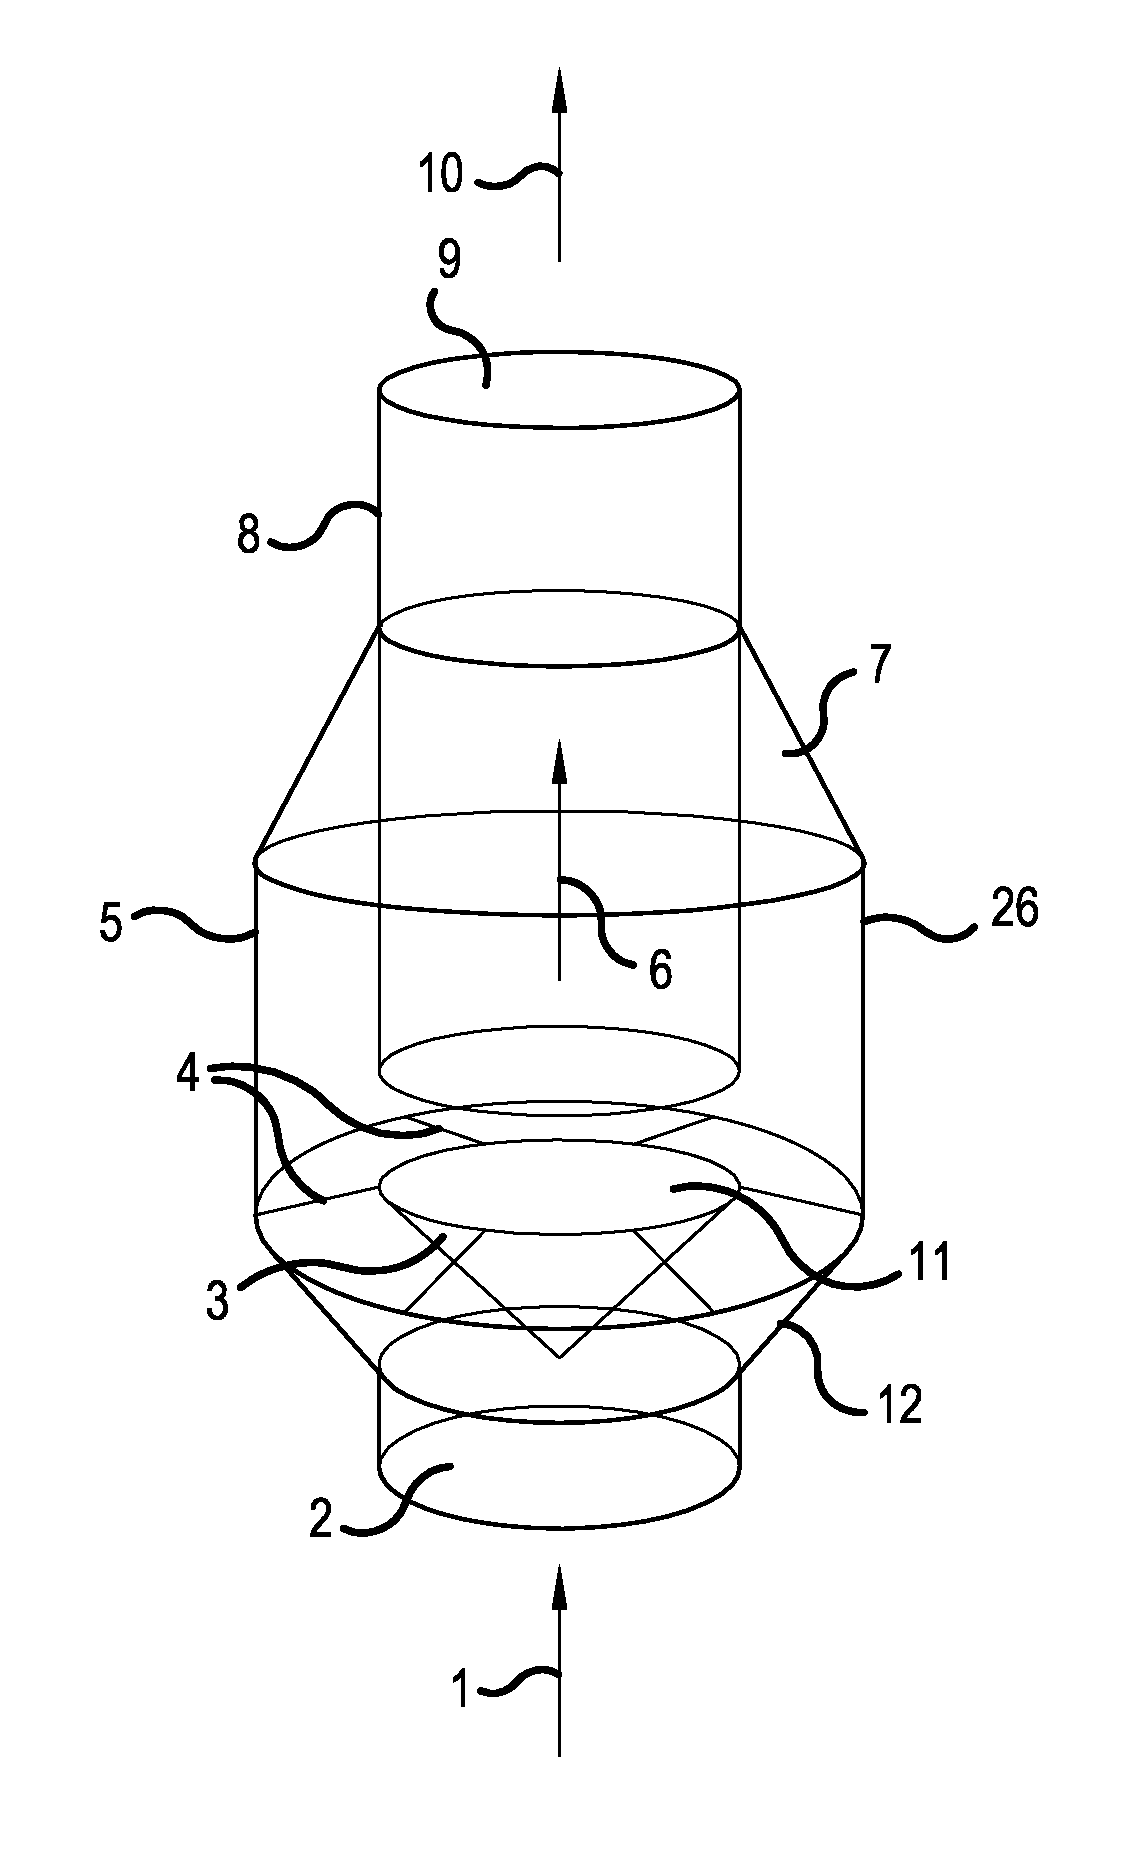 Spark arrestor and methods associated therewith